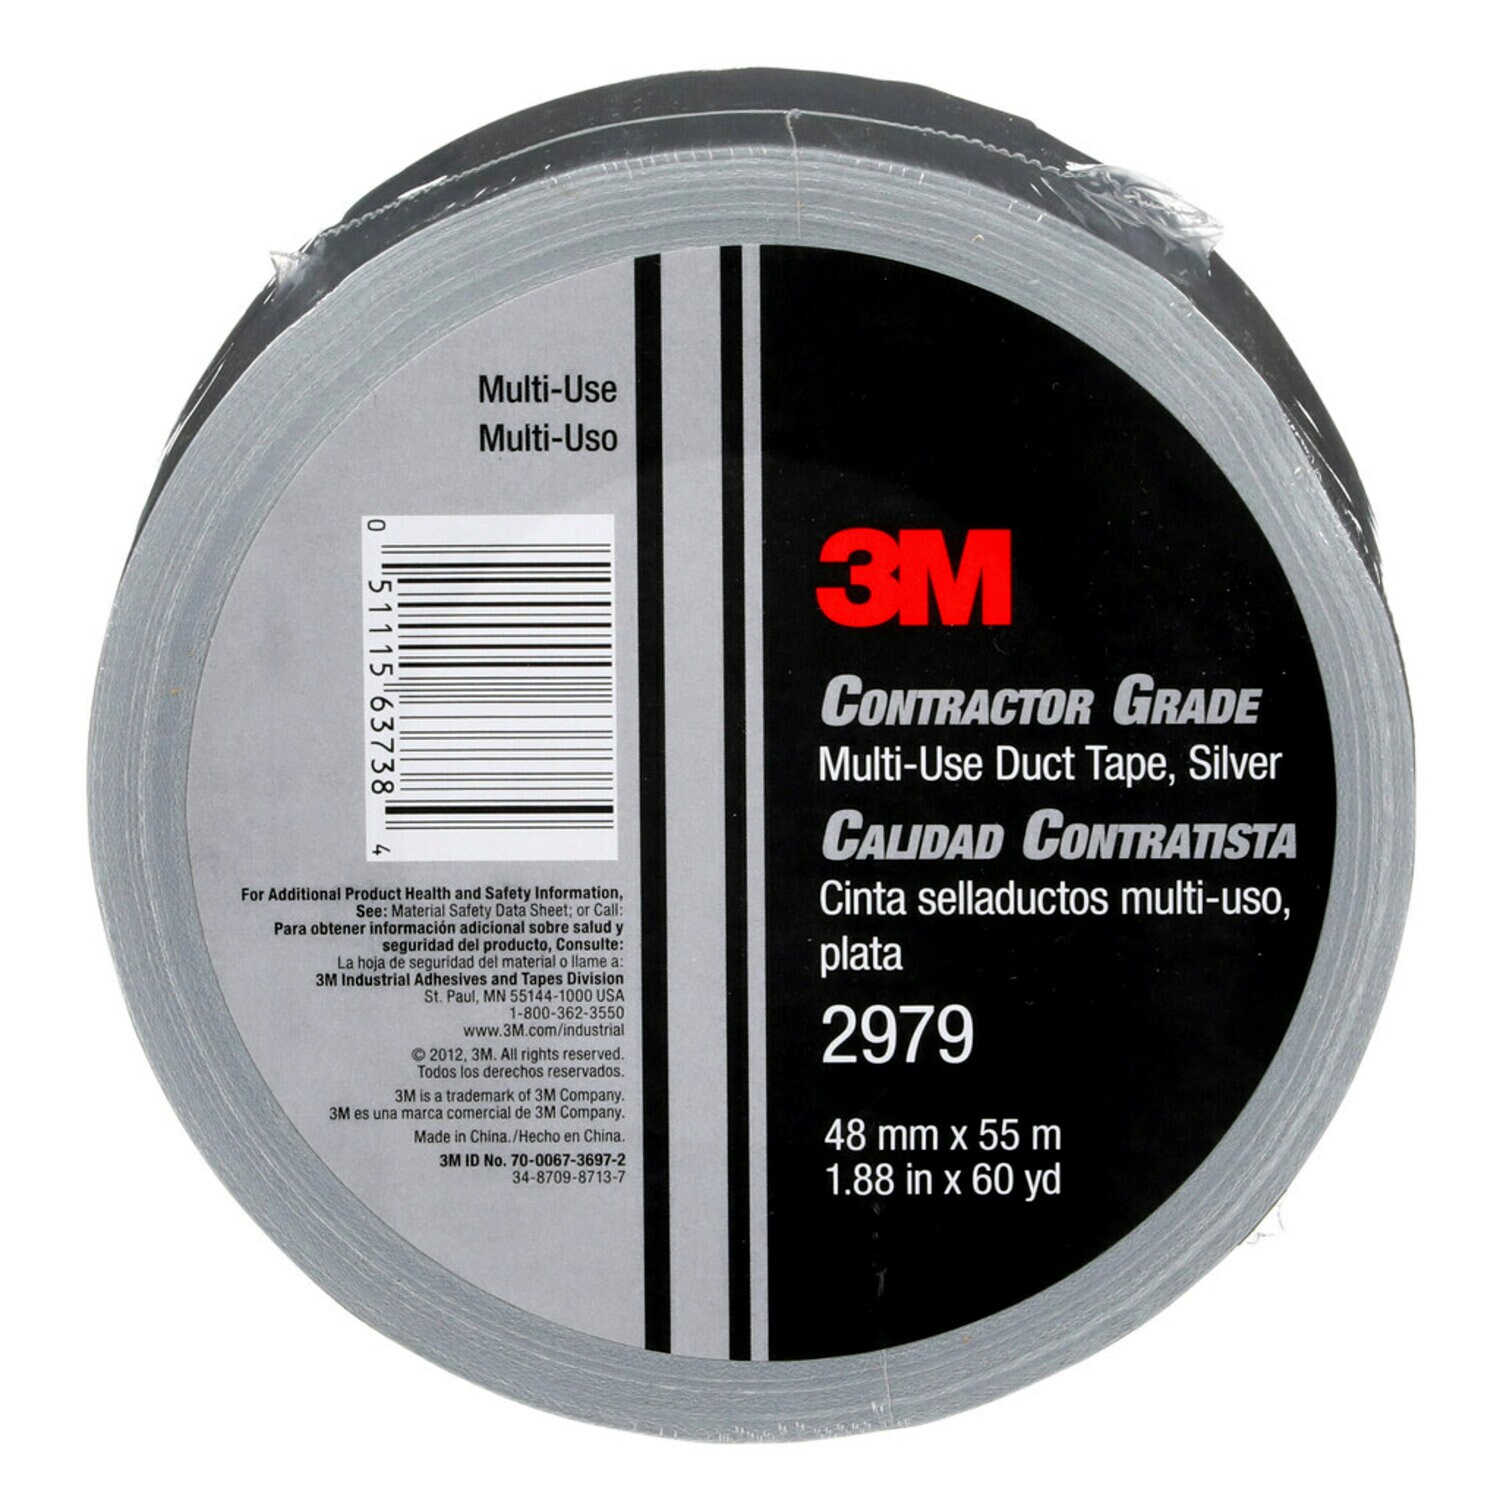 7010335692 - 3M Contractor Grade Multi-Use Duct Tape 2979, Silver, 1.88 in x 60 yd,
24/Case, Individually Wrapped Conveniently Packaged